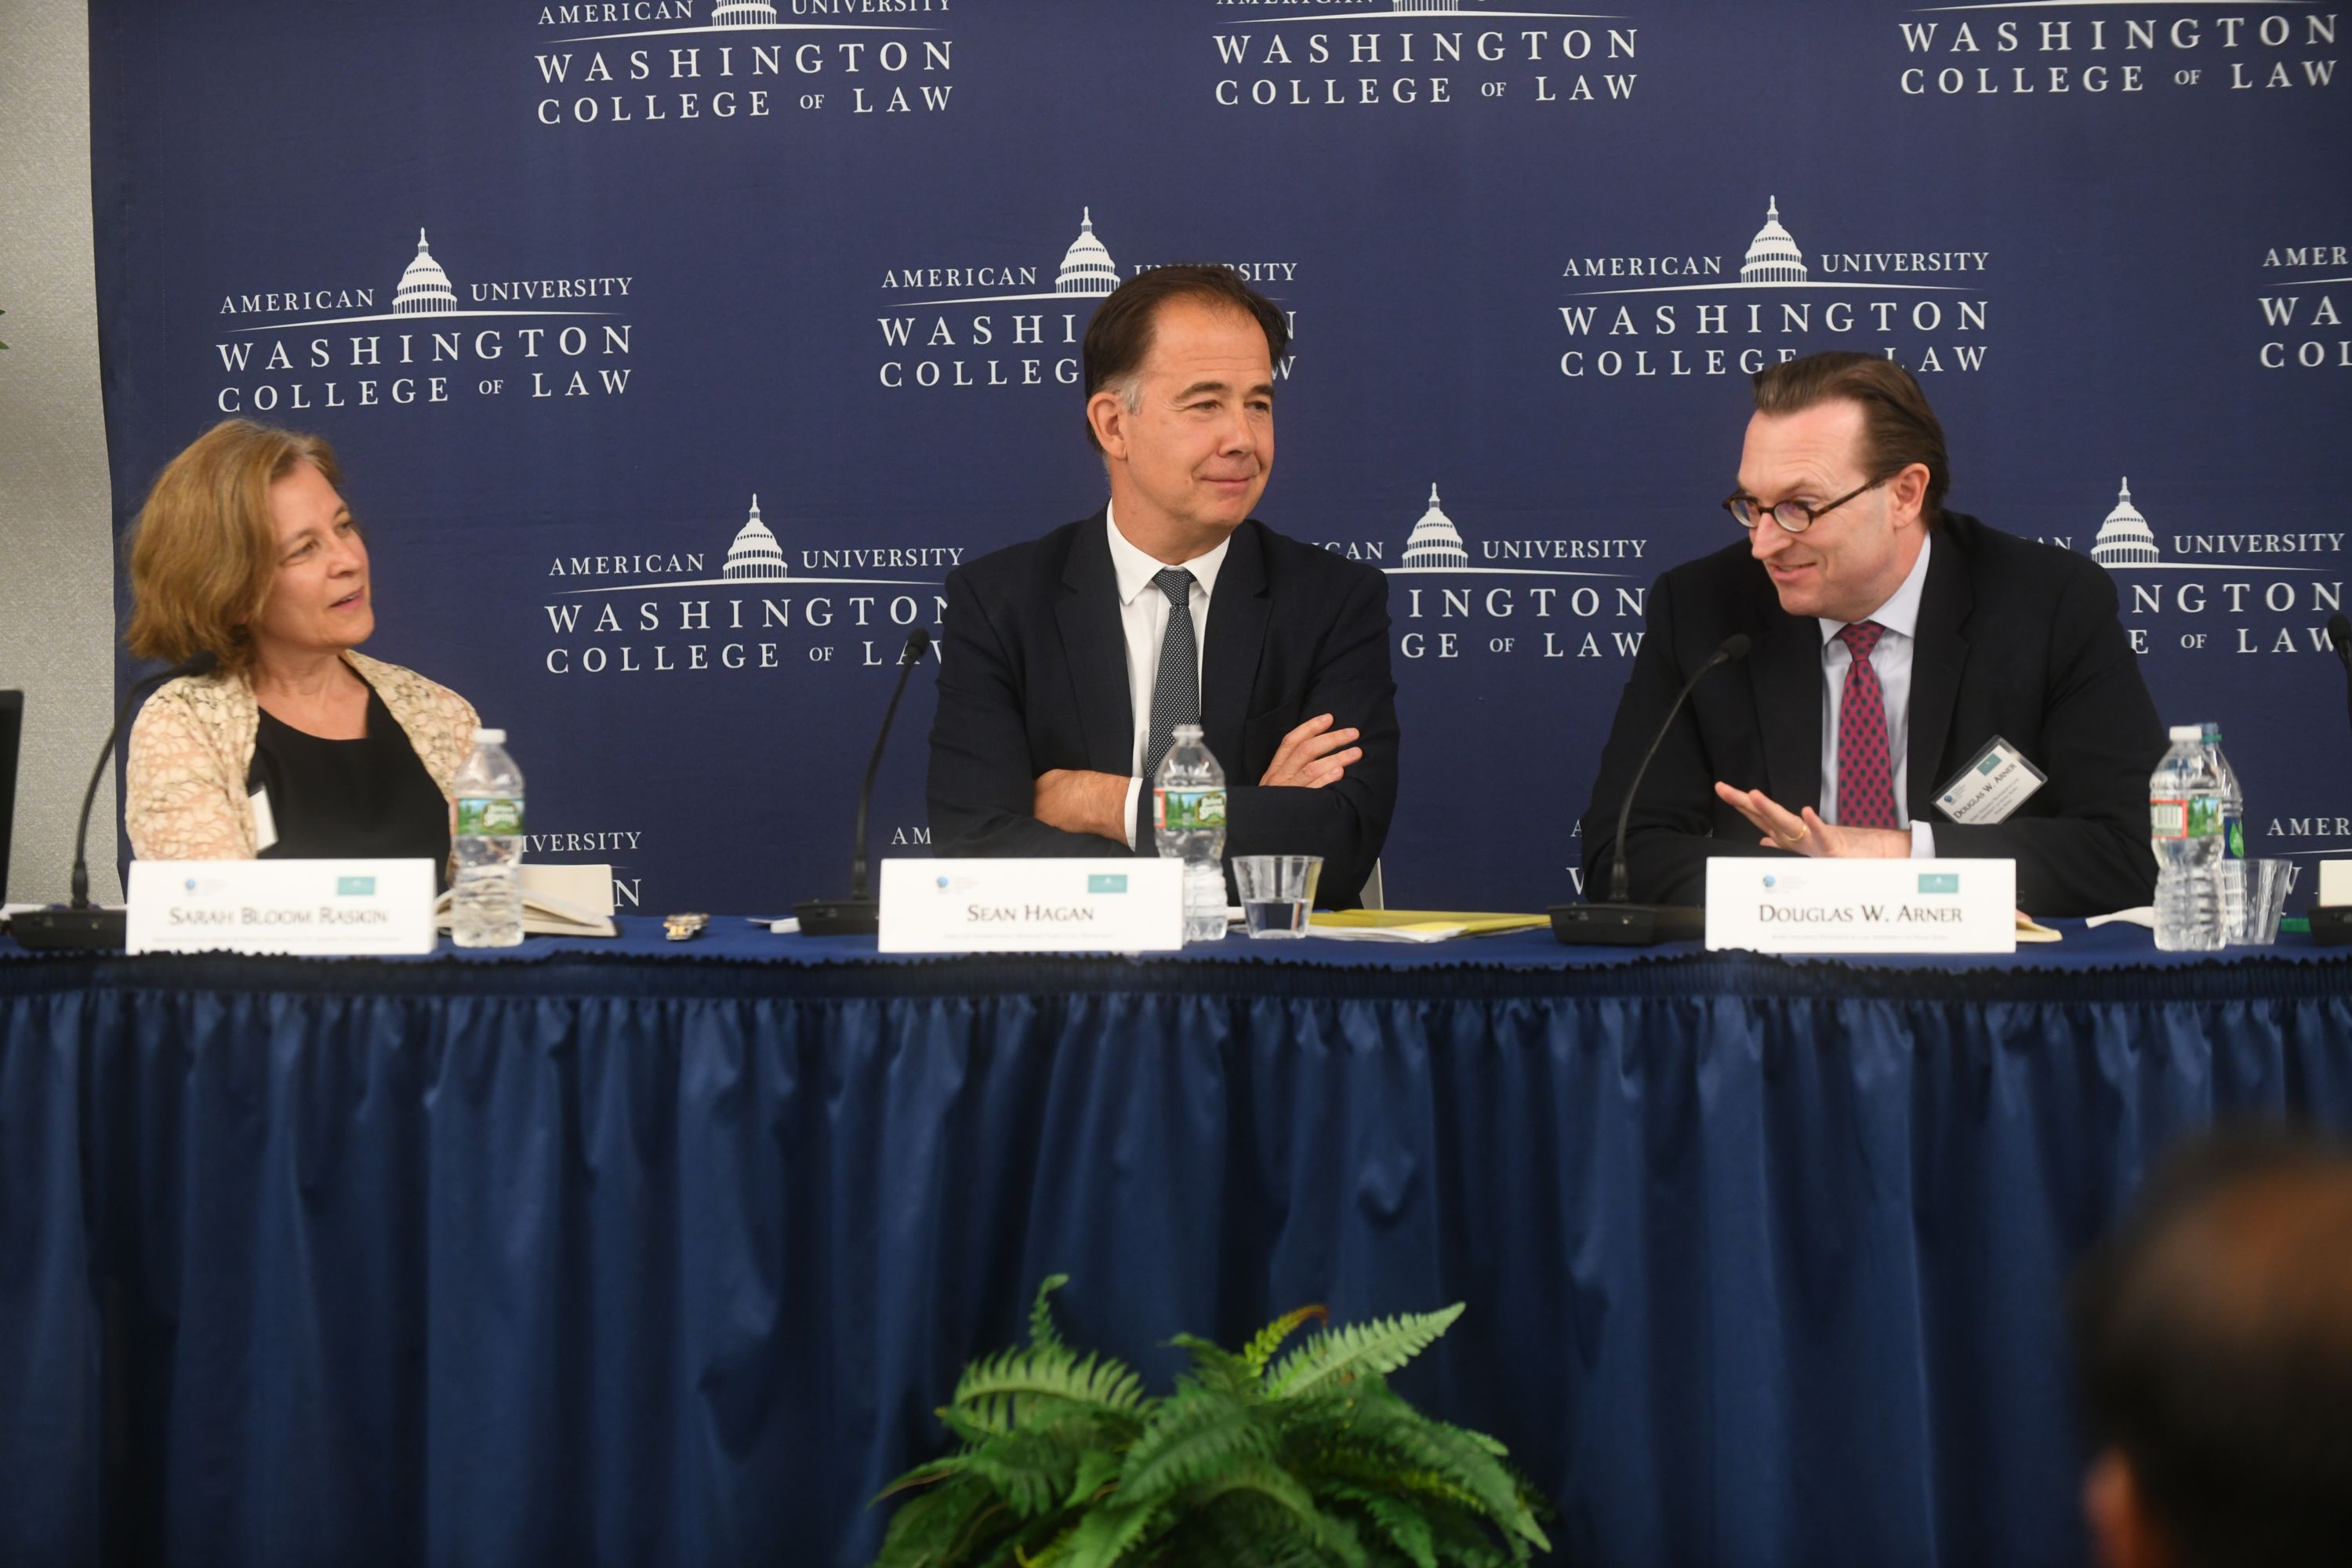 Panel on “Financial Policy and Practice in Unsettling Time”. Left to right: Sarah B. Raskin, former United States Deputy Secretary of the Treasury, Sean Hagan, Director of the International Monetary Fund Legal Department, and Douglas W. Arner, Kerry Holdings Professor in Law, University of Hong Kong.